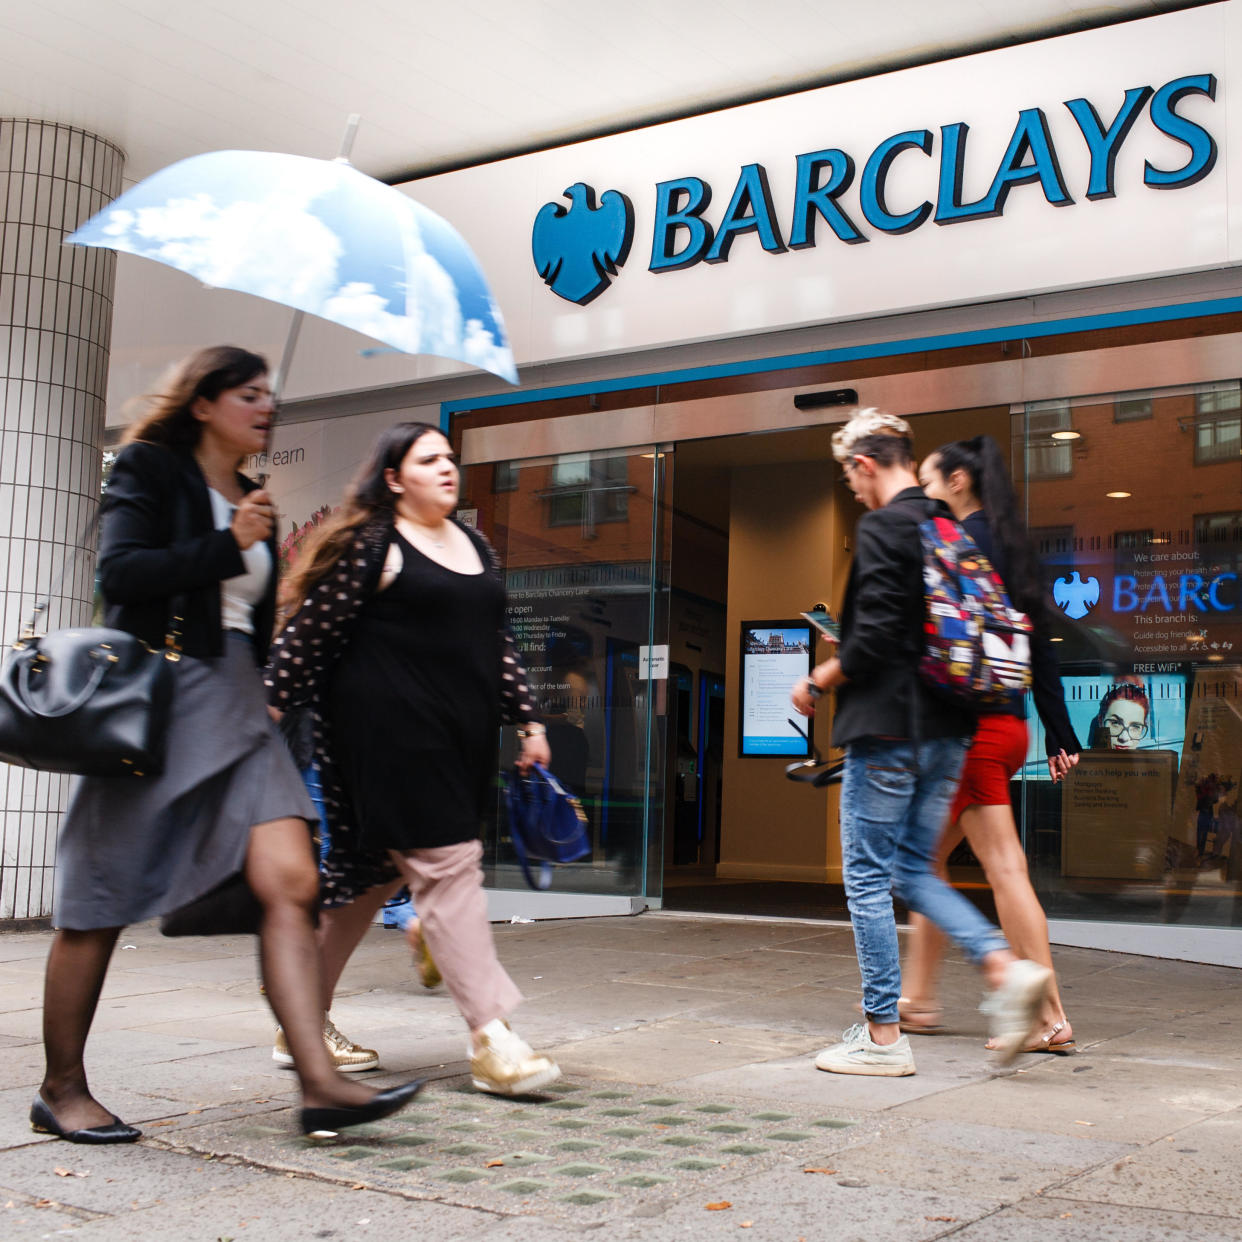 July 26, 2019, London, United Kingdom: People walk past a branch of Barclays bank on High Holborn in central London. Four major UK banks, including Barclays, are set to release interim figures over the coming days. Half-year results for Lloyds Banking Group are due out on July 31, for Barclays on August 1, for the Royal Bank of Scotland (RBS) on August 2 and for HSBC on August 5. Credit: David Cliff/SOPA Images/ZUMA Wire/Alamy Live News